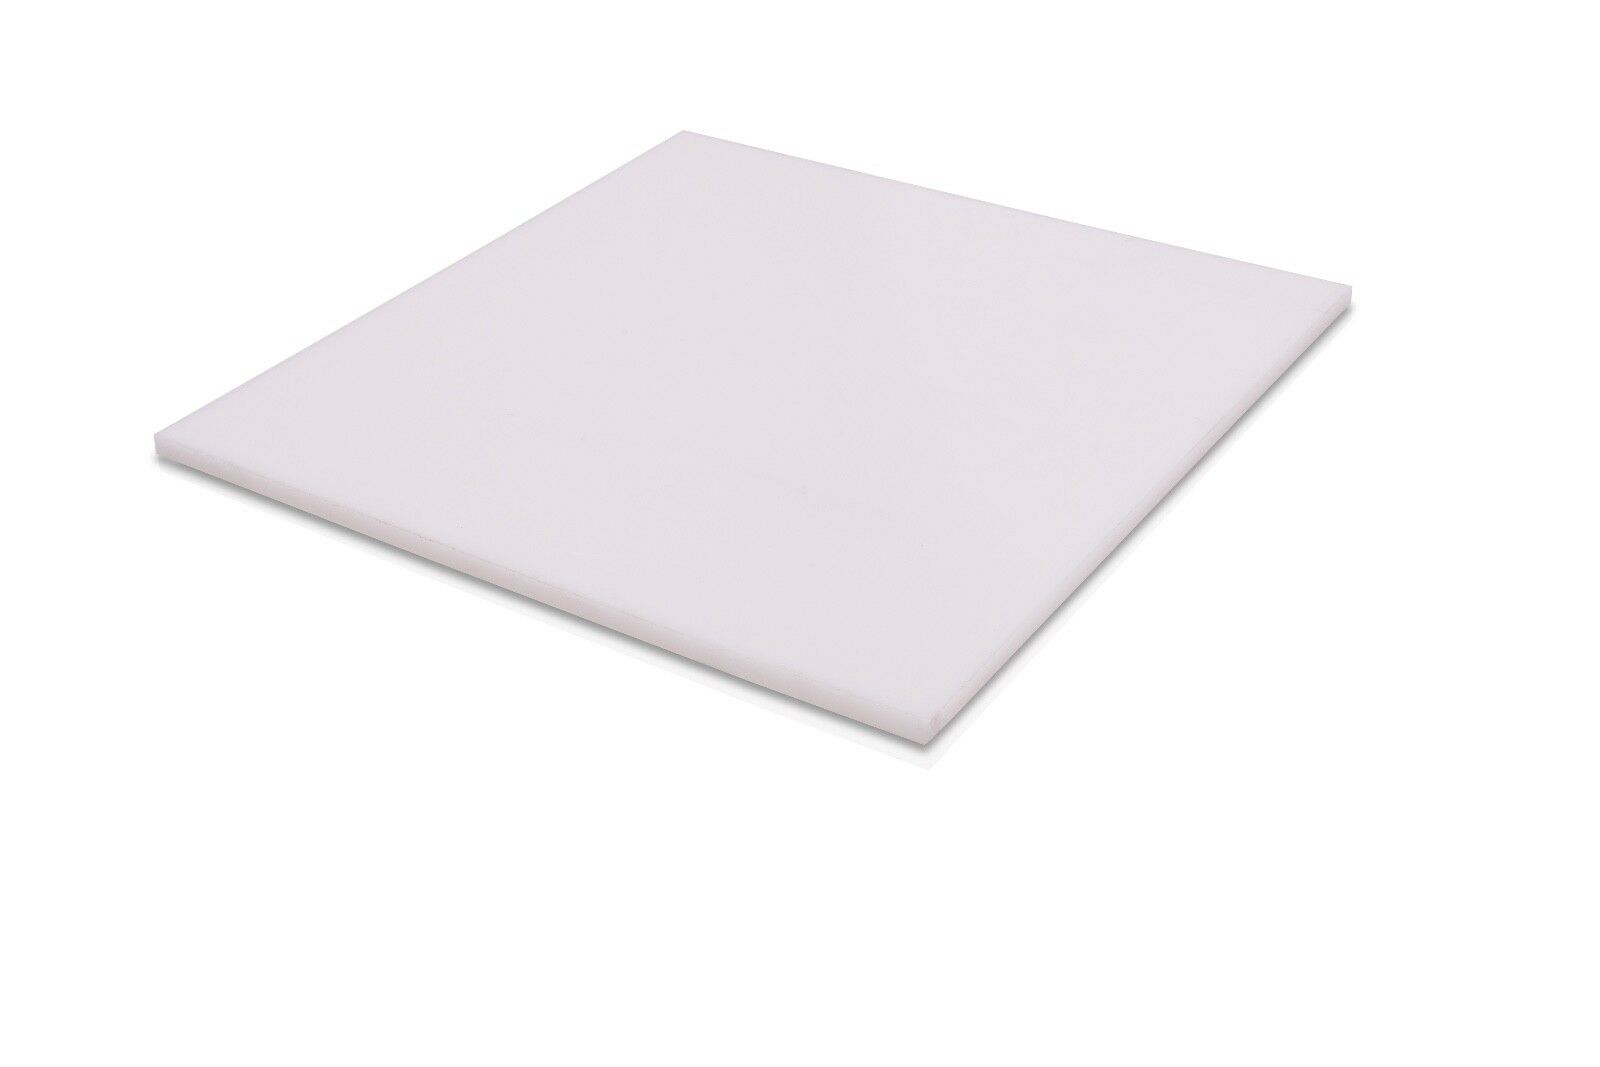 White Plastic (hdpe) Cutting Board 1/4” - .250” Thick Fda/nsf You Pick The Size